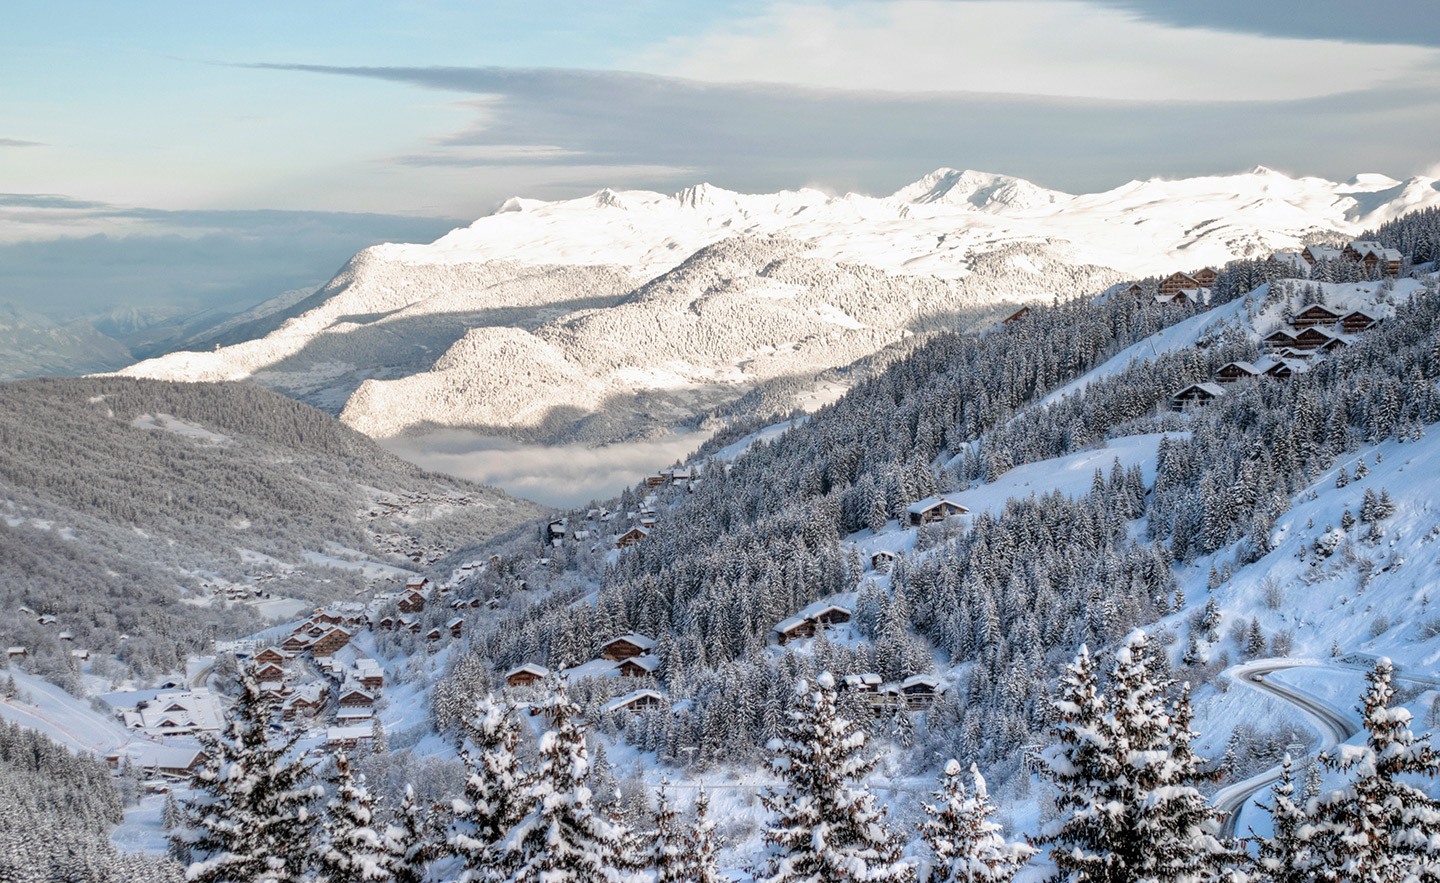 Views down the Meribel Valley, French Alps